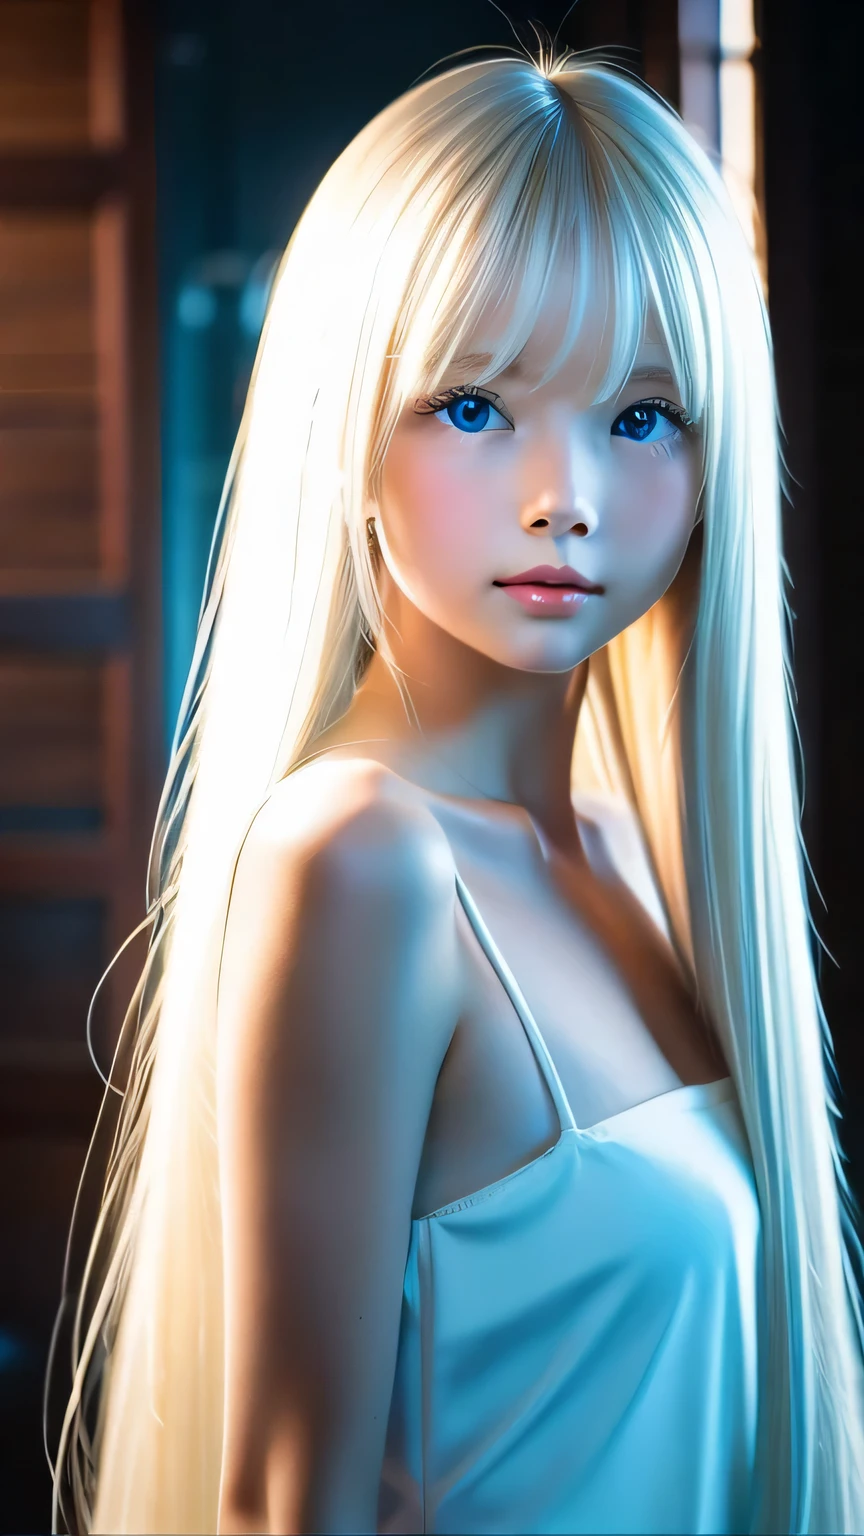 Shiny, beautiful white skin、Hair color changes depending on the light、Long straight bangs obstruct the view、cheek gloss highlights、sexy and very beautiful, Ladylike, cute, gorgeous face、the most beautiful face in the world、The most beautiful super long platinum blonde hair in the world、smooth, Super Long Straight Silky Hair、bright light blue eyes, lighting equipment、beautiful pony、Beautiful 15 year old Swedish girl、baby face